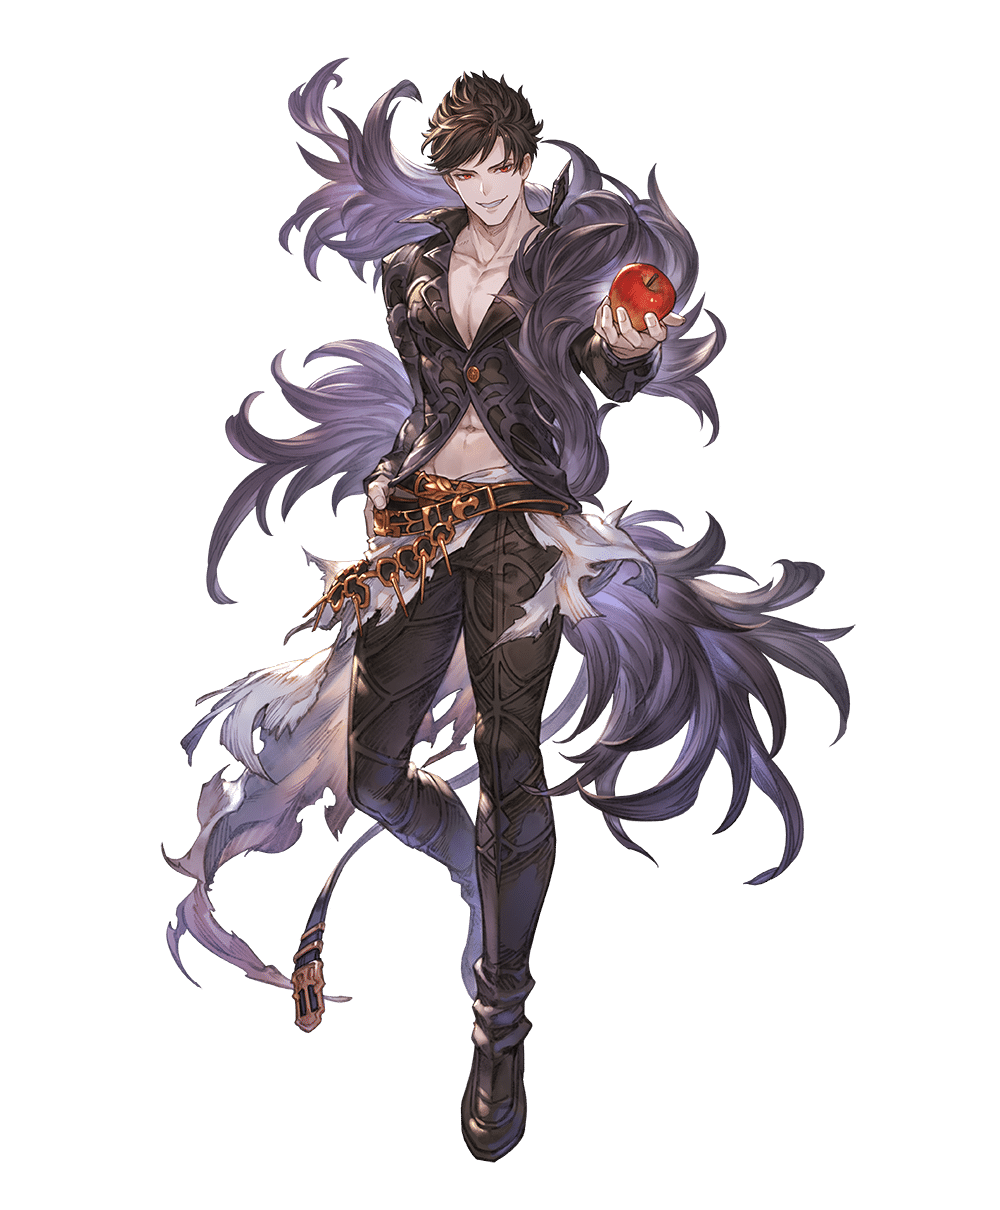 Final boss and upcoming DLC announced for Granblue Fantasy: Versus